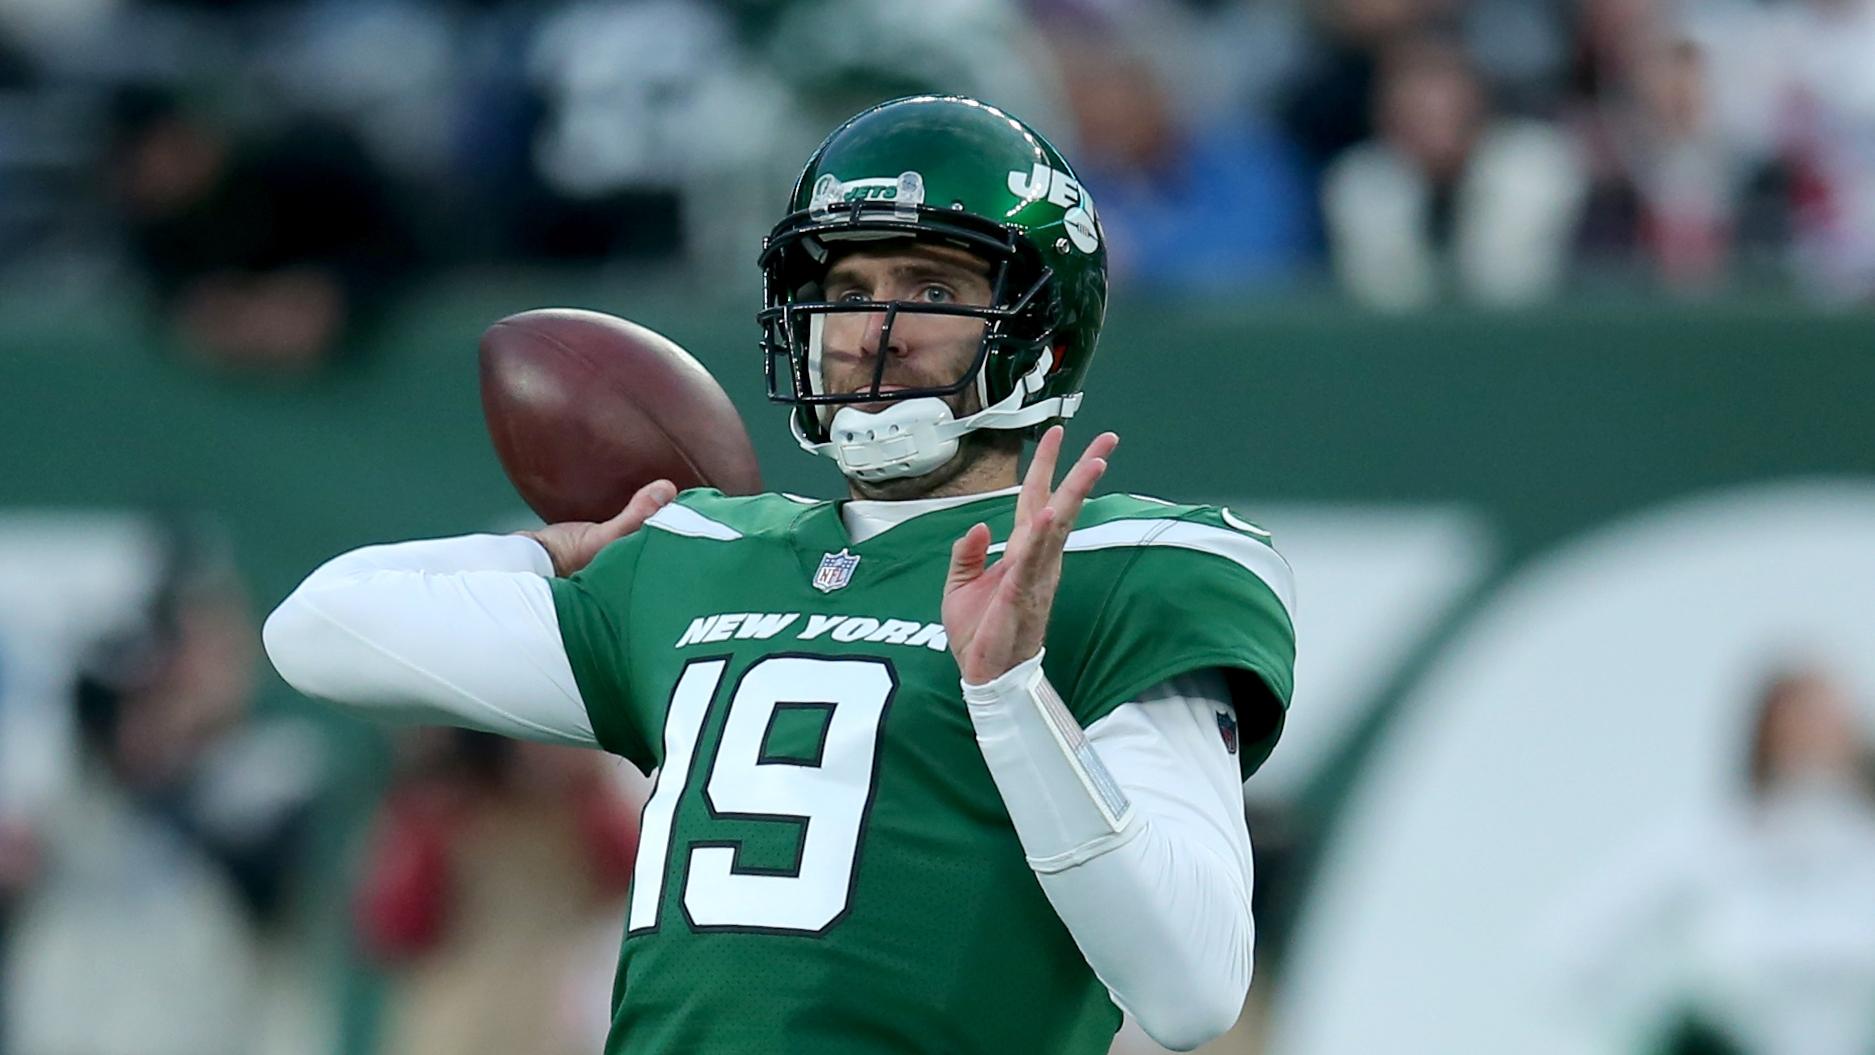 New York Jets quarterback Joe Flacco (19) throws a pass against the Buffalo Bills during the fourth quarter at MetLife Stadium. / Brad Penner-USA TODAY Sports